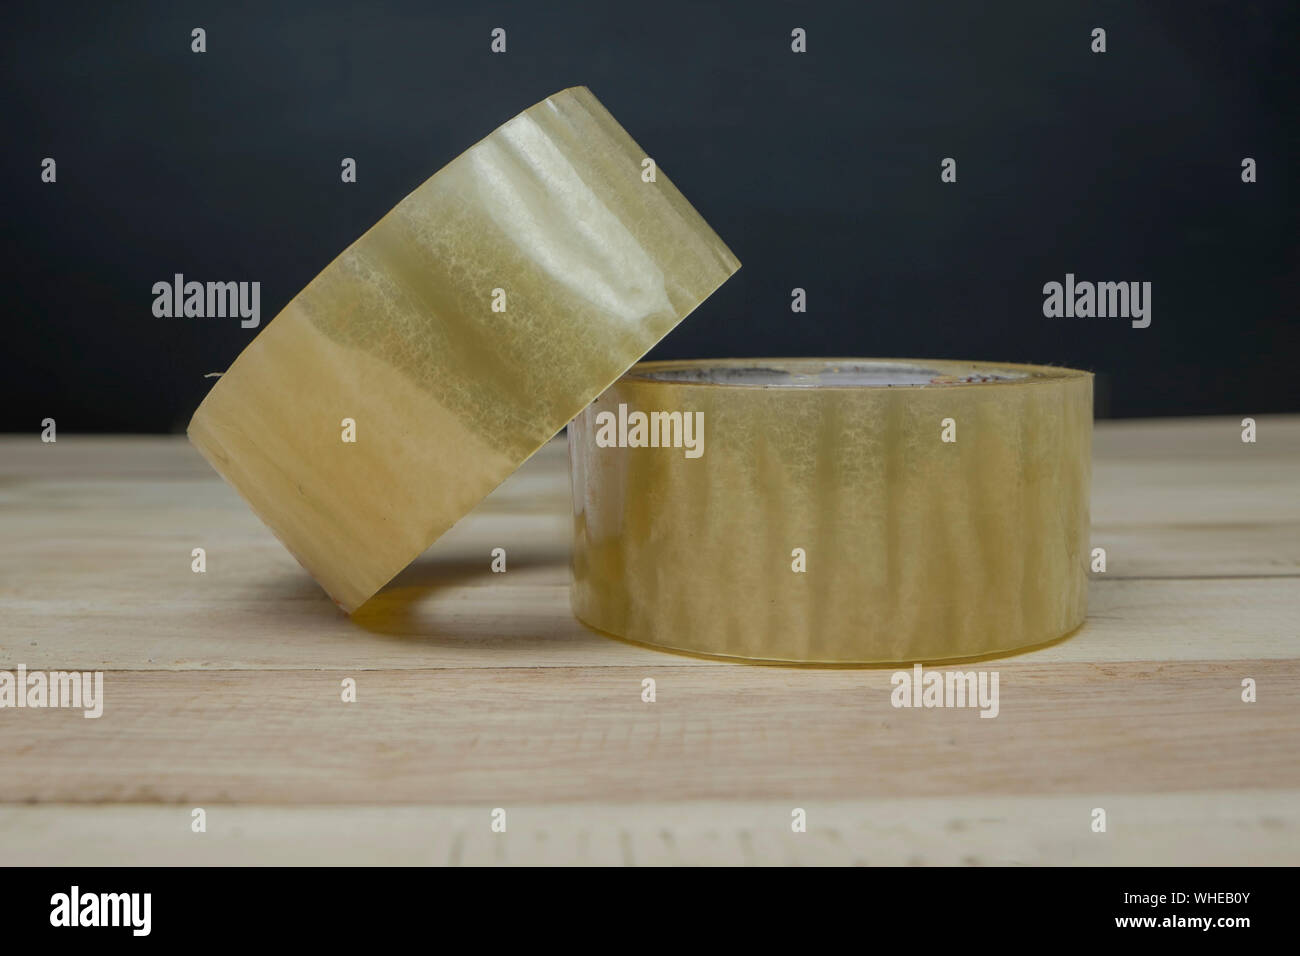 Close-up Of Adhesive Tape On Table Stock Photo